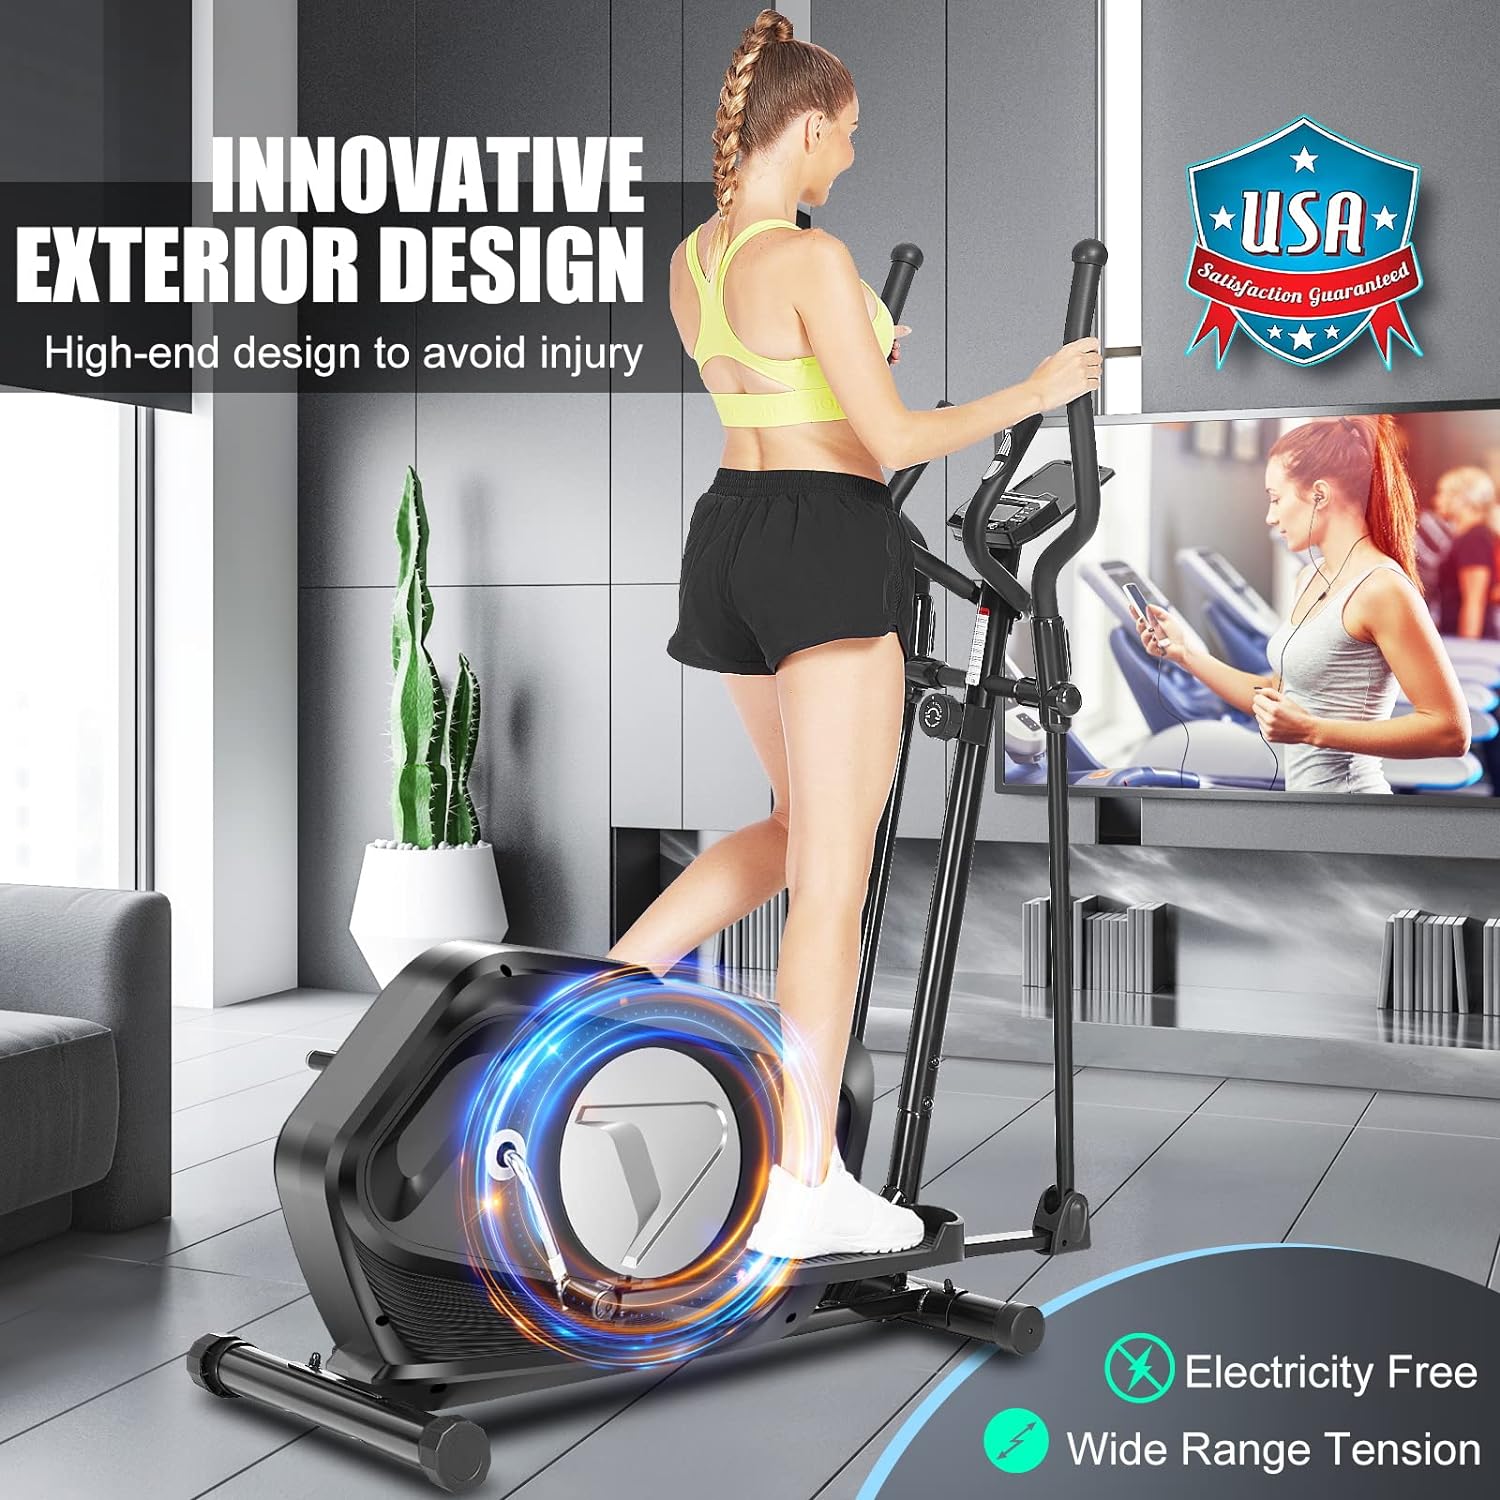 funmily 8-Level Adjustable Silent Magnetic Resistance Elliptical Training Machine w/LCD Monitor&Pulse Rate Grip,390LBS Weight Capacity